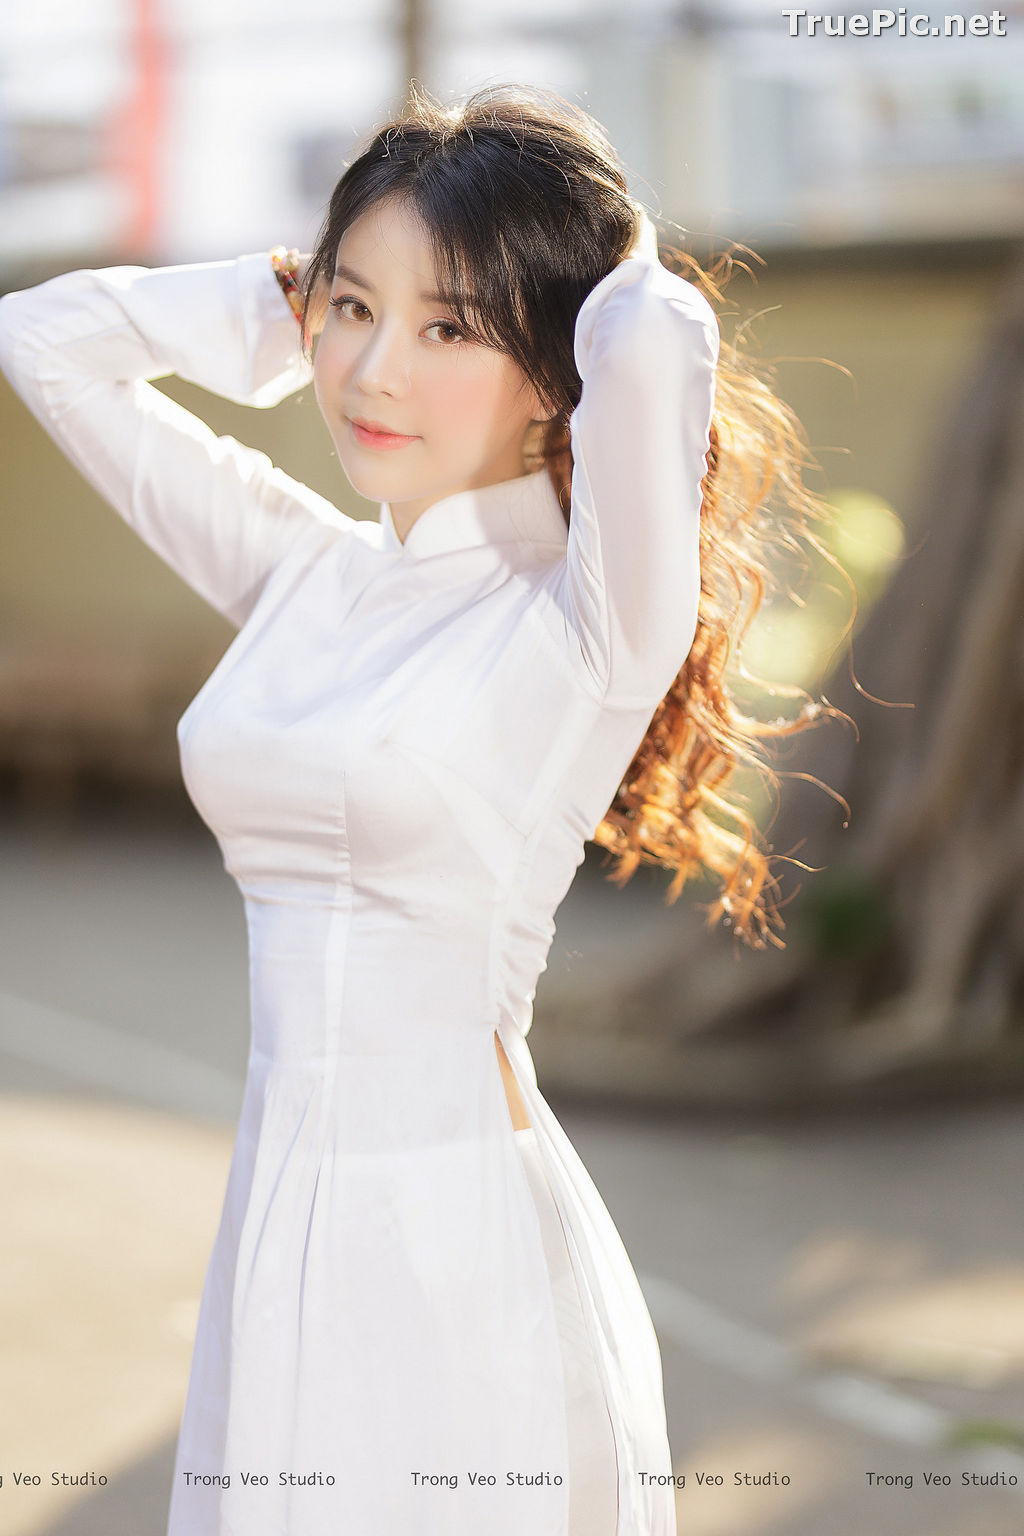 Image The Beauty of Vietnamese Girls with Traditional Dress (Ao Dai) #5 - TruePic.net - Picture-37